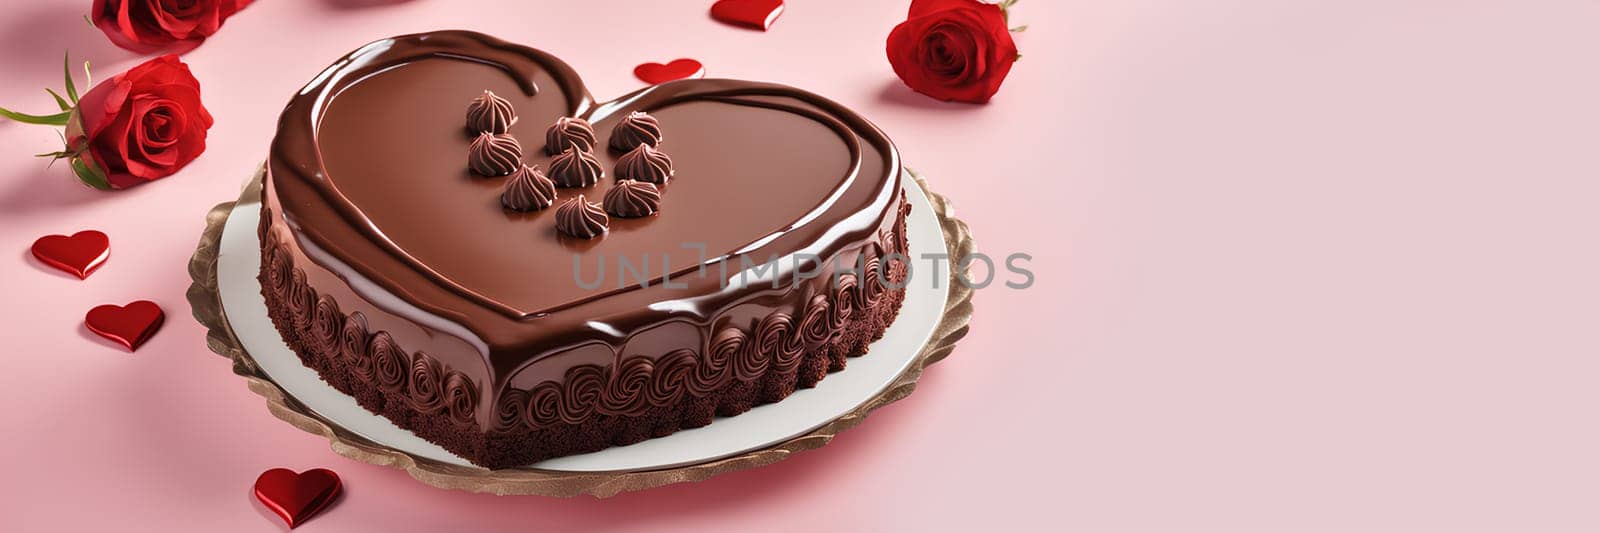 Heart-shaped chocolate cake for Valentine's Day. by Annu1tochka